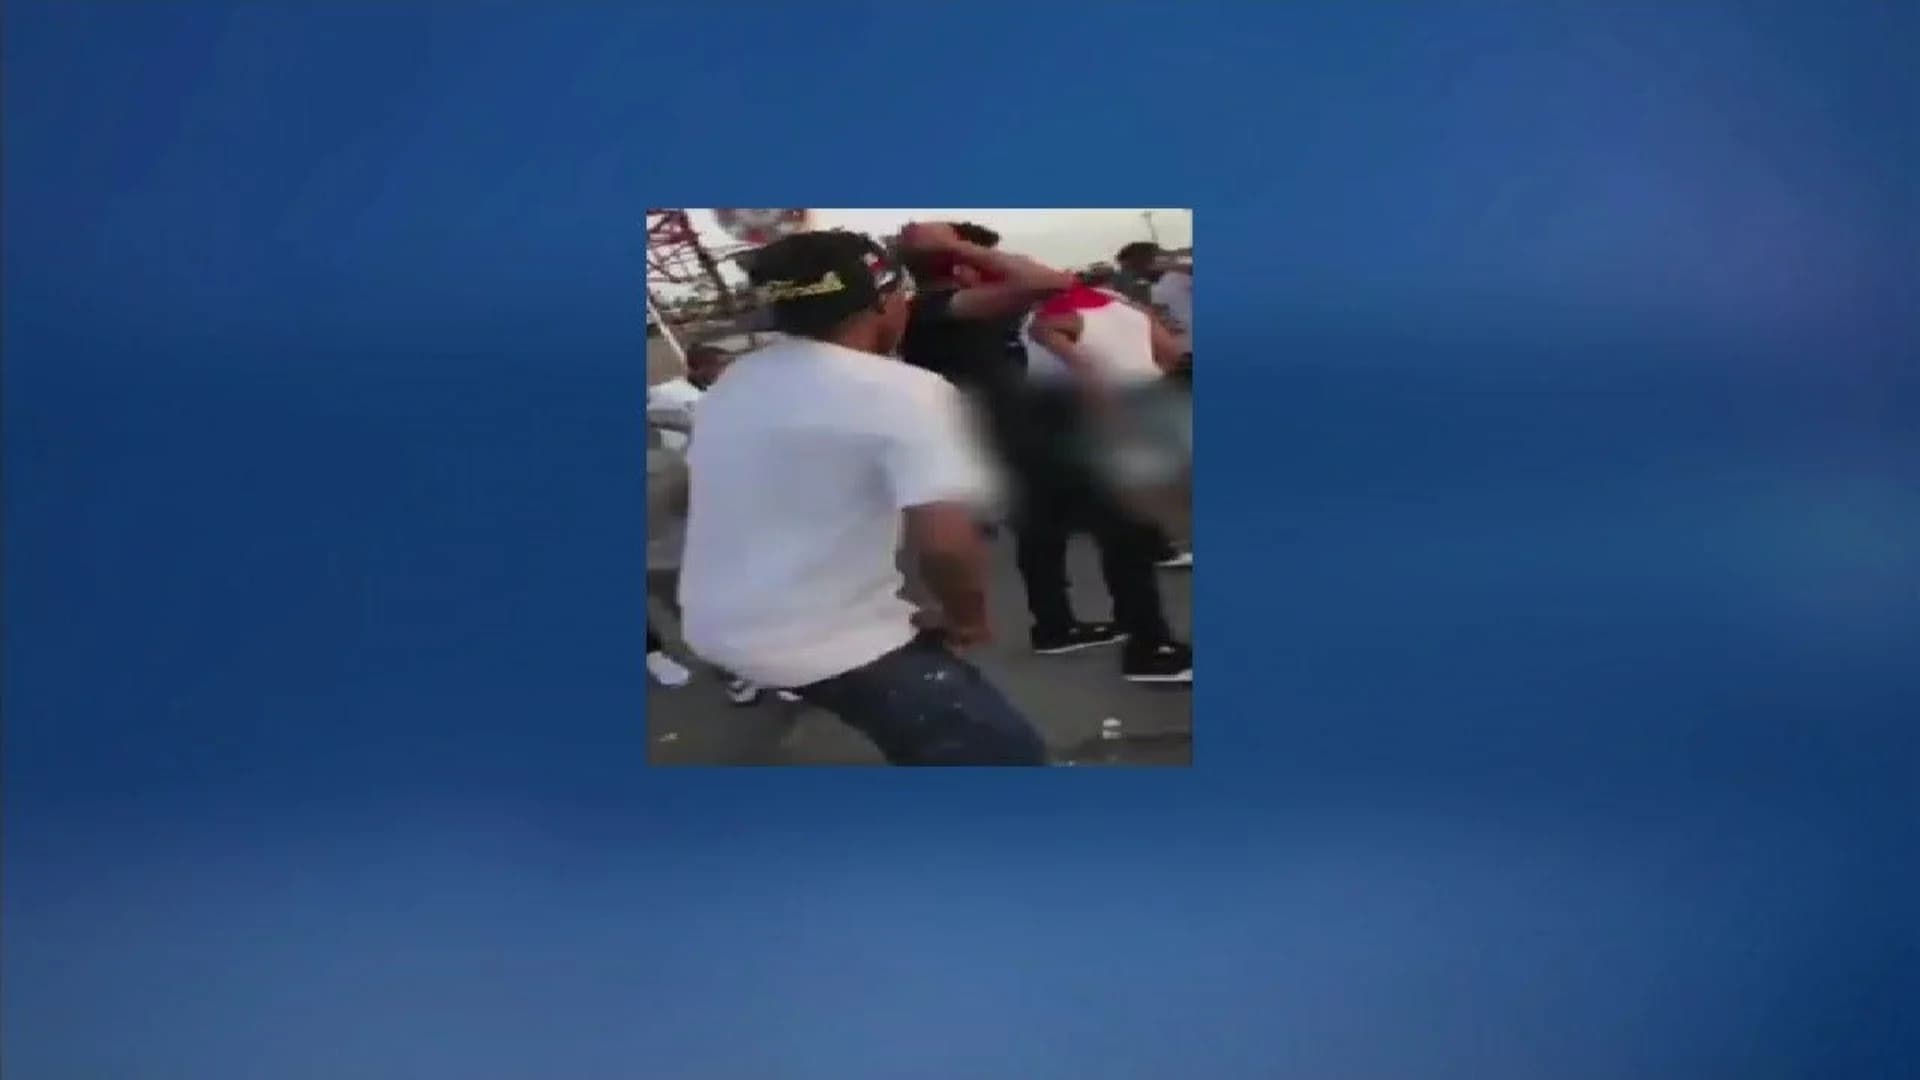 Video shows teen attacked by group at Luna Park